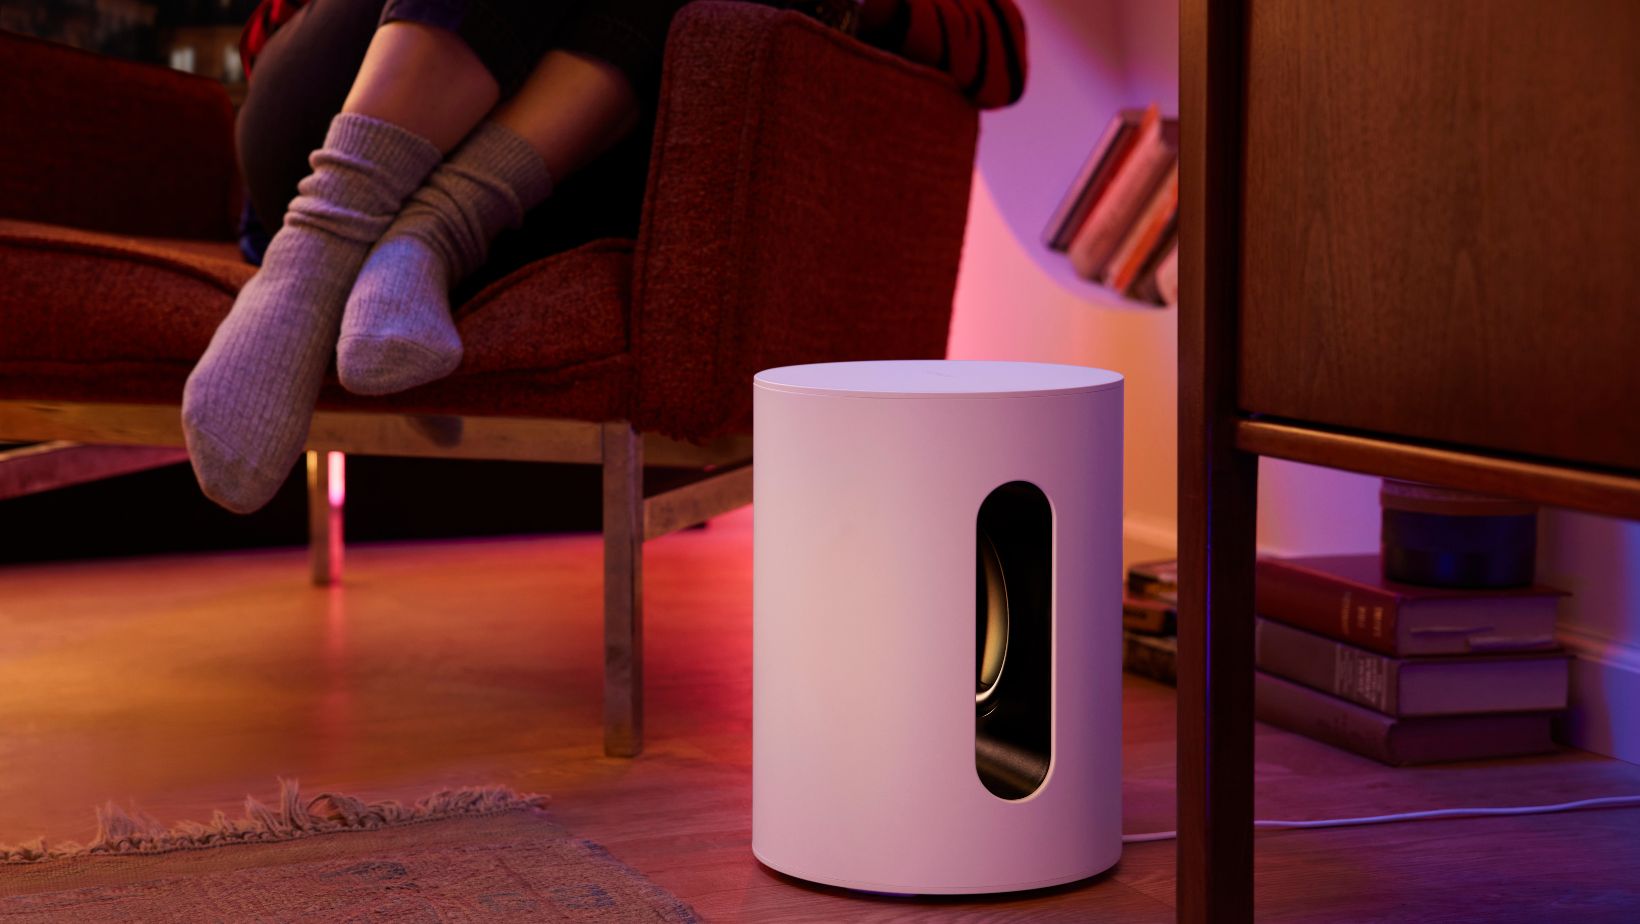 white Sonos sub mini on the floor next to an armchair. We see the grey-socked feet of the person sitting in the chair